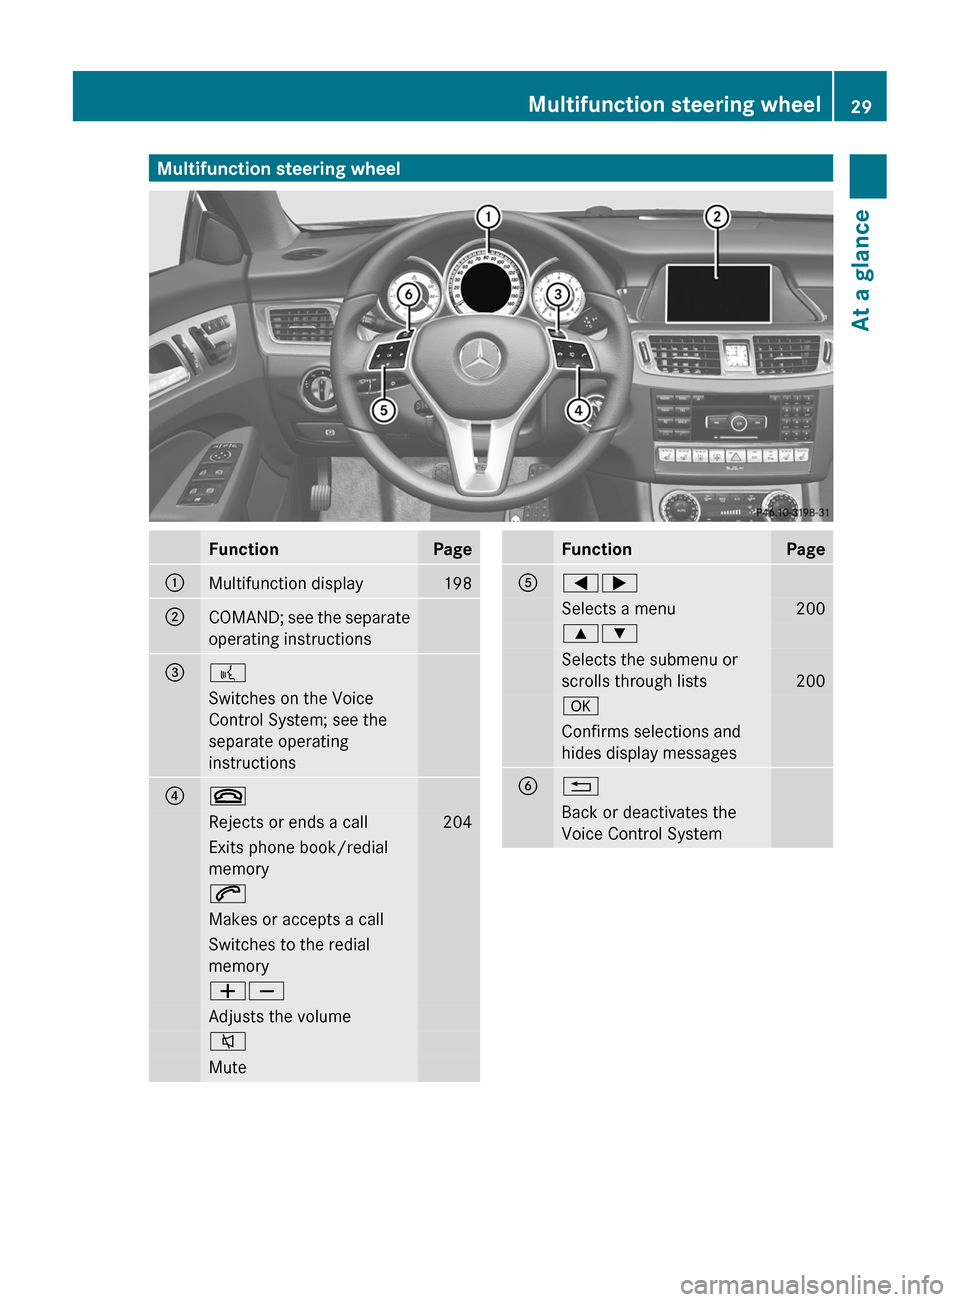 MERCEDES-BENZ CLS-Class 2012 W218 Owners Manual Multifunction steering wheelFunctionPage:Multifunction display198;COMAND; see the separate
operating instructions=?Switches on the Voice
Control System; see the
separate operating
instructions?~Reject